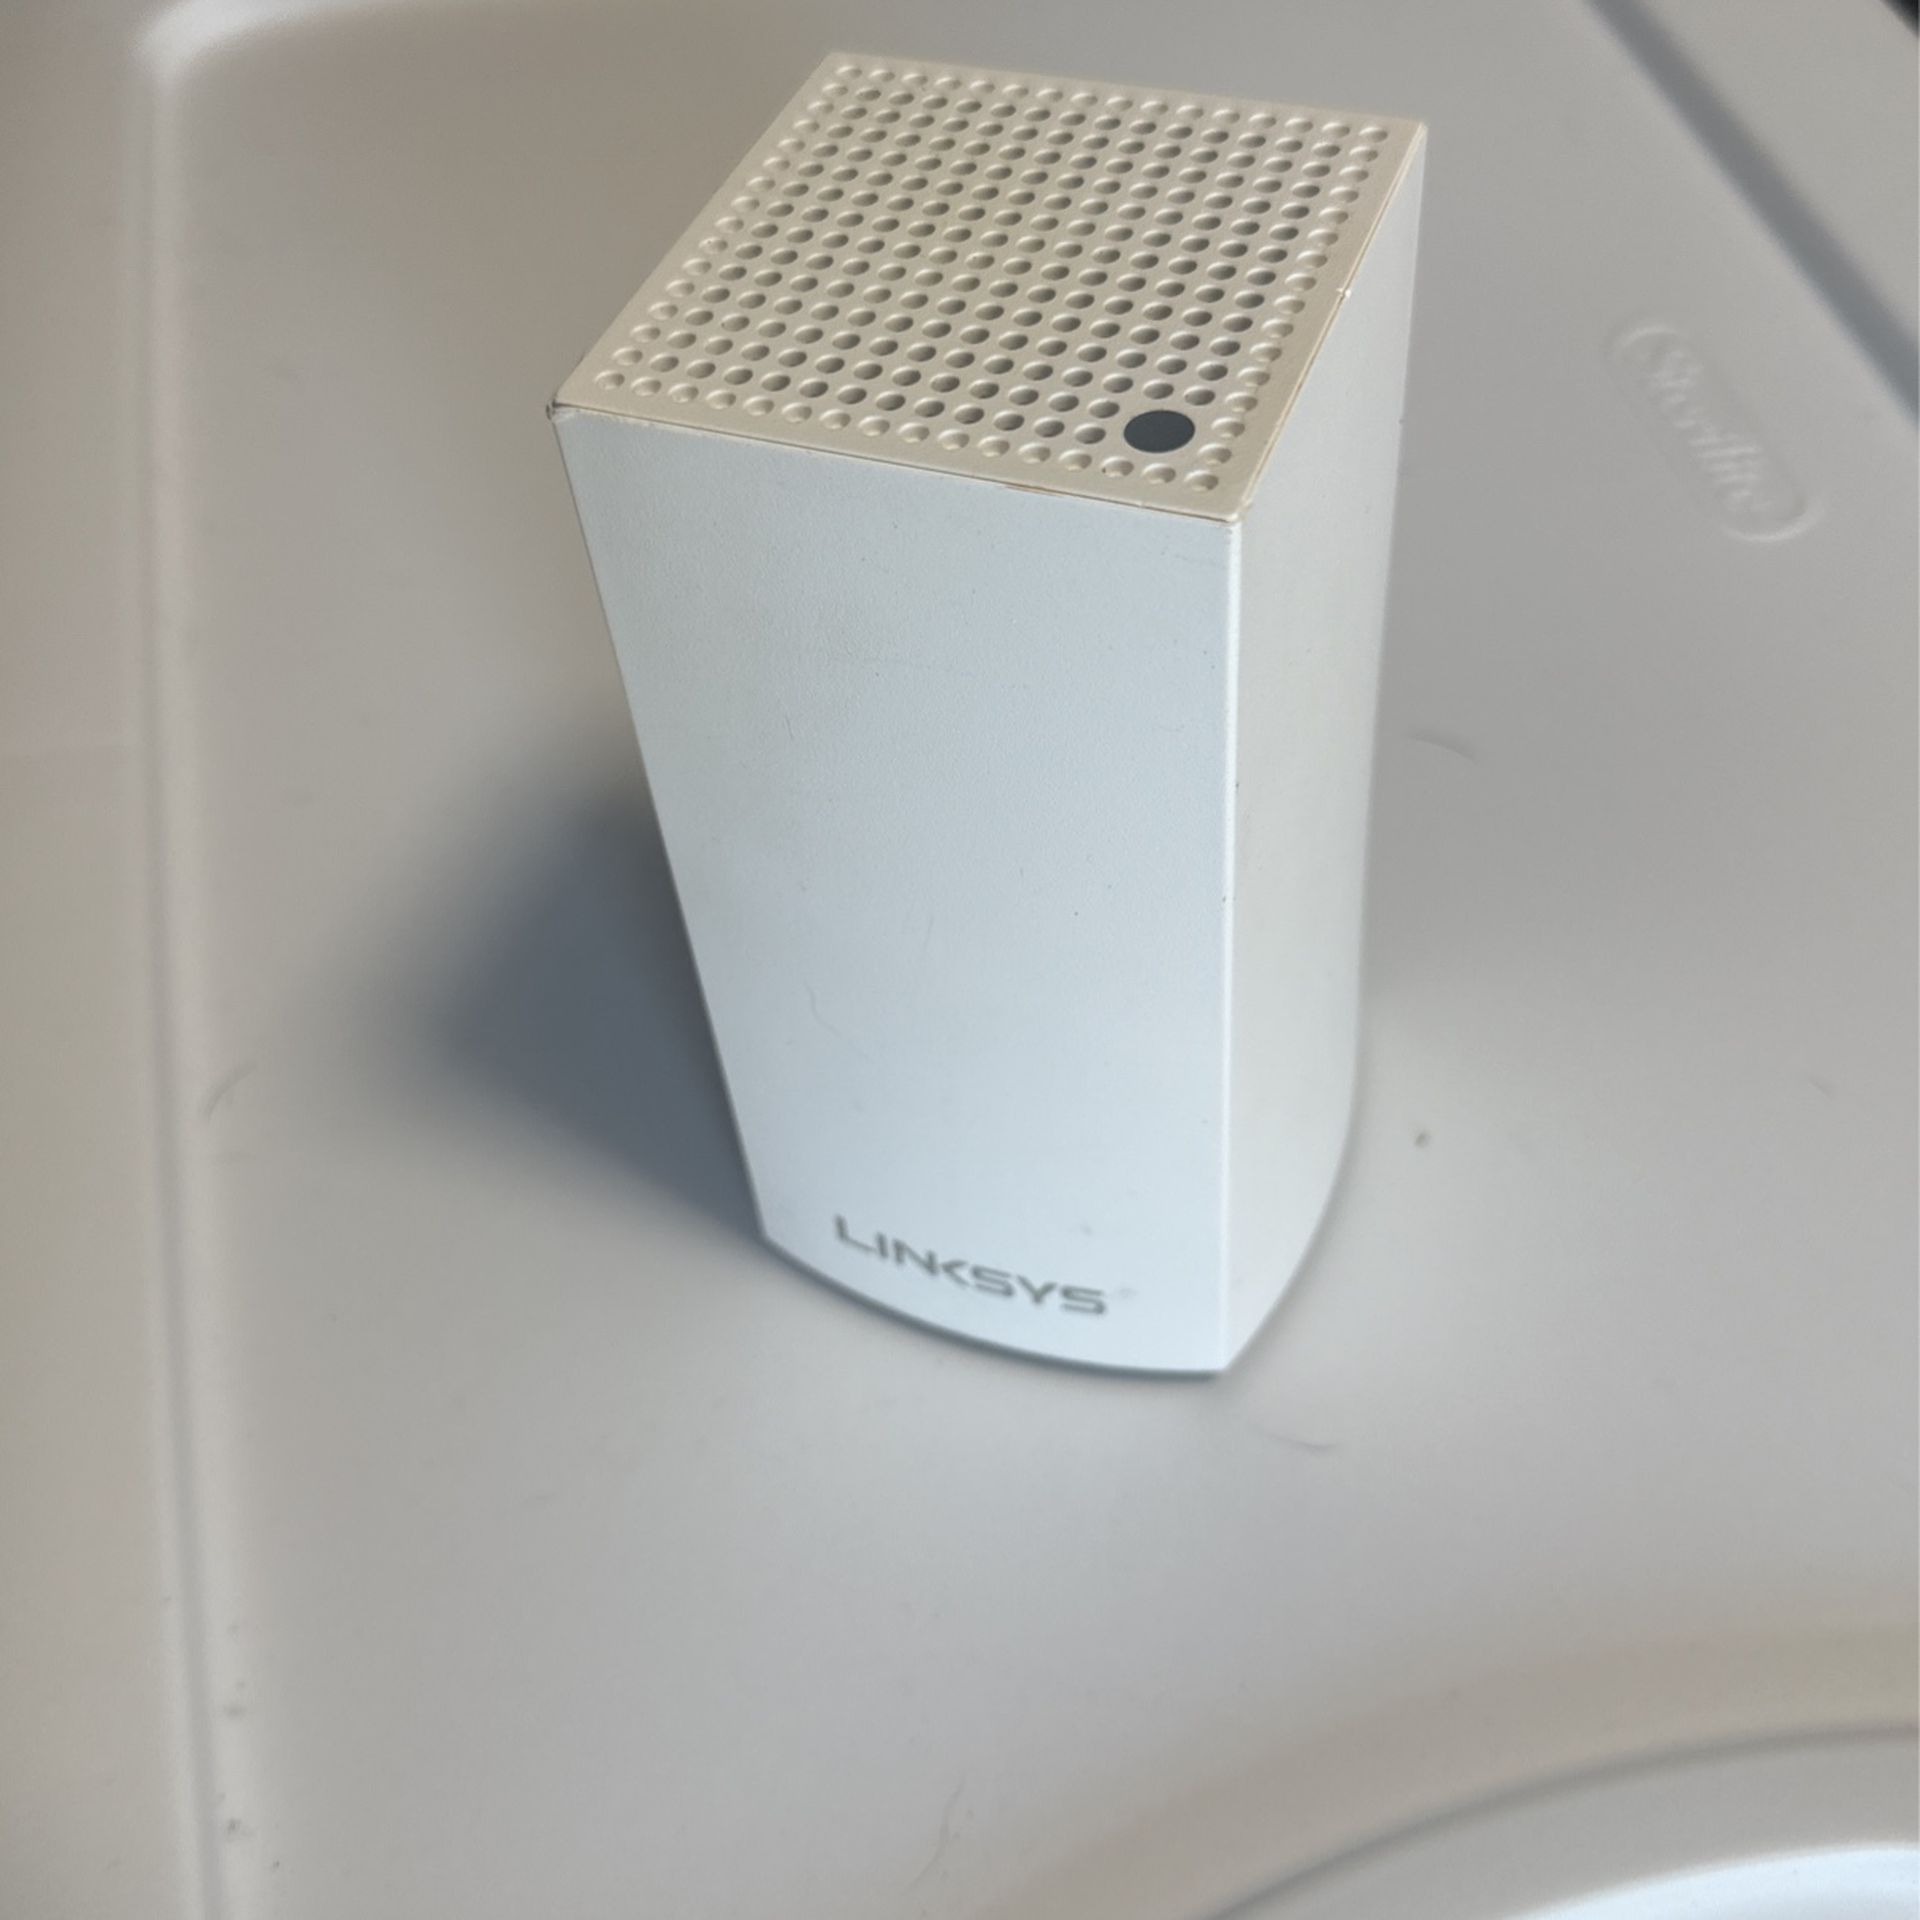 Linksys Velop Router